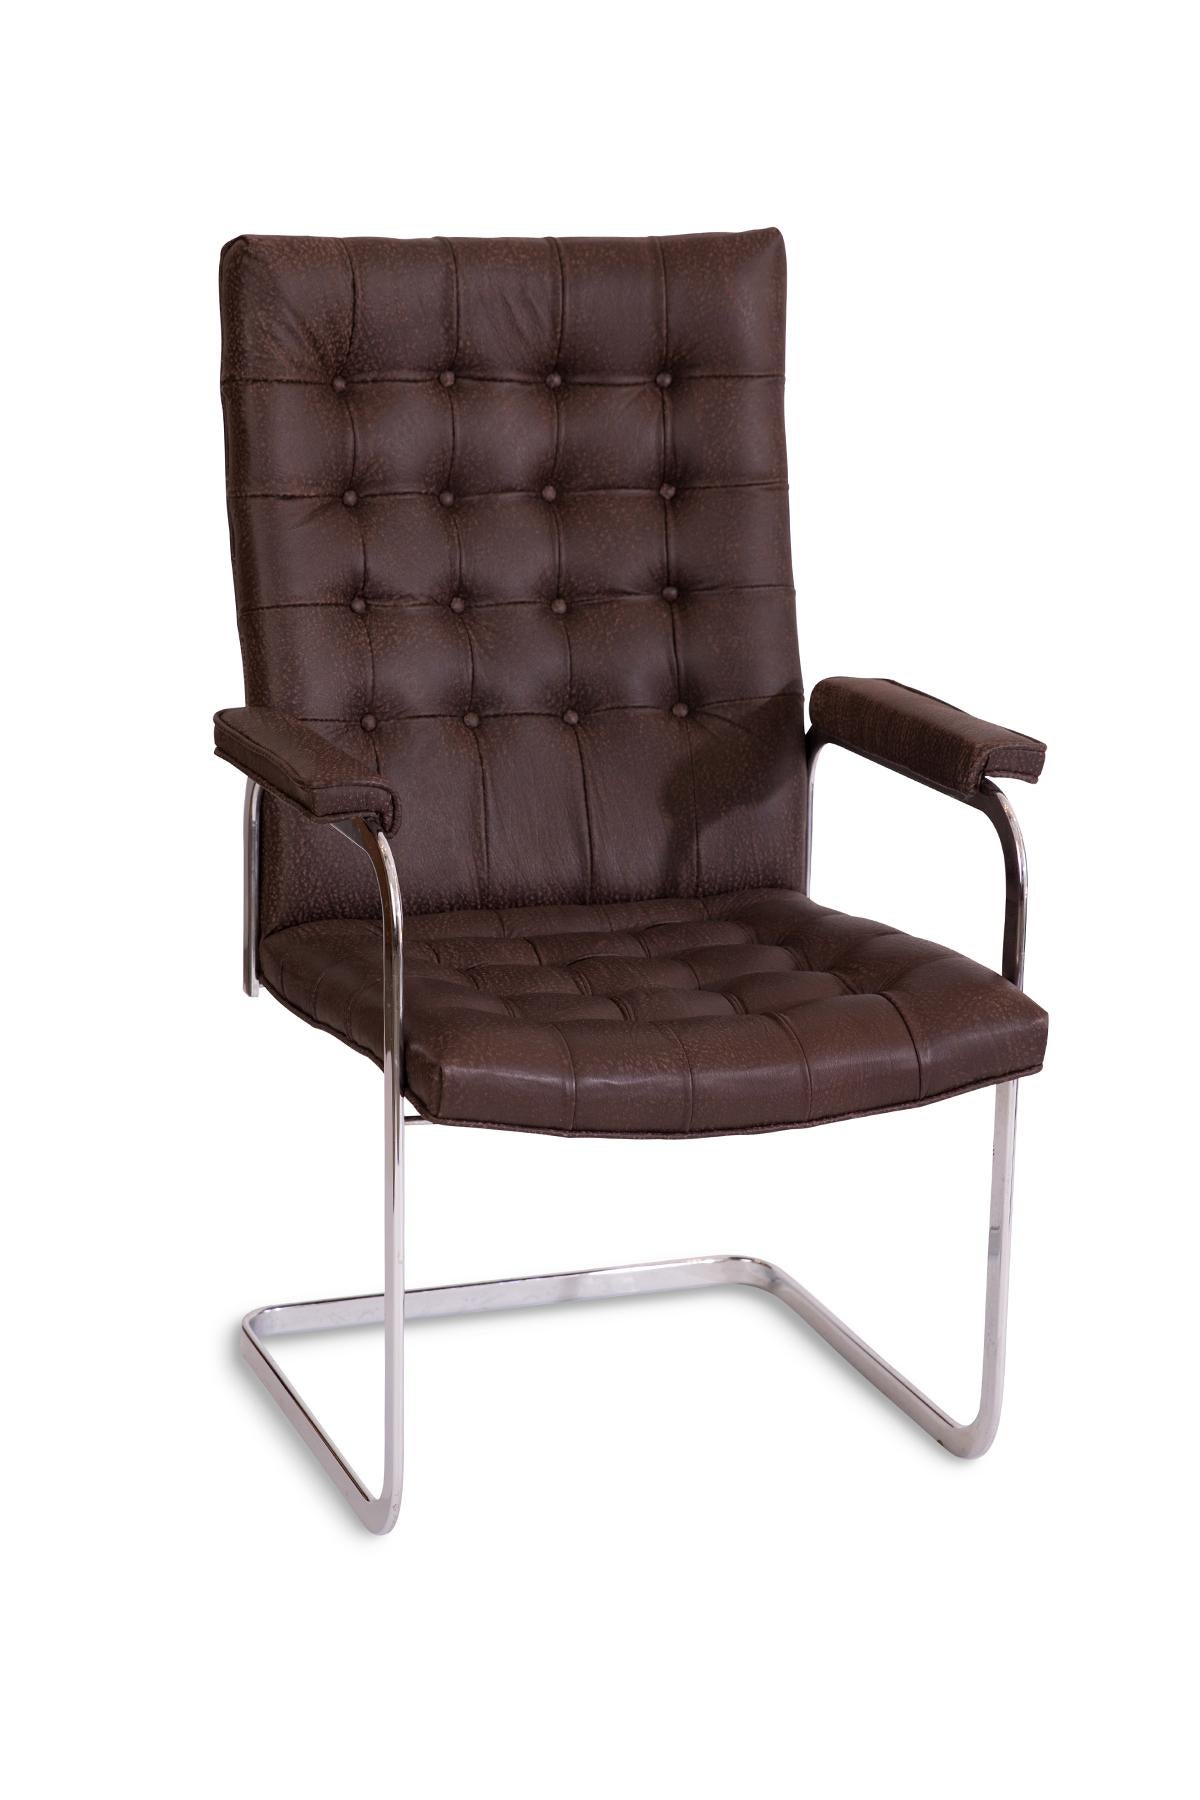 Italian Stendig Steel and Dark Brown Leather Cantilevered Dining Chairs